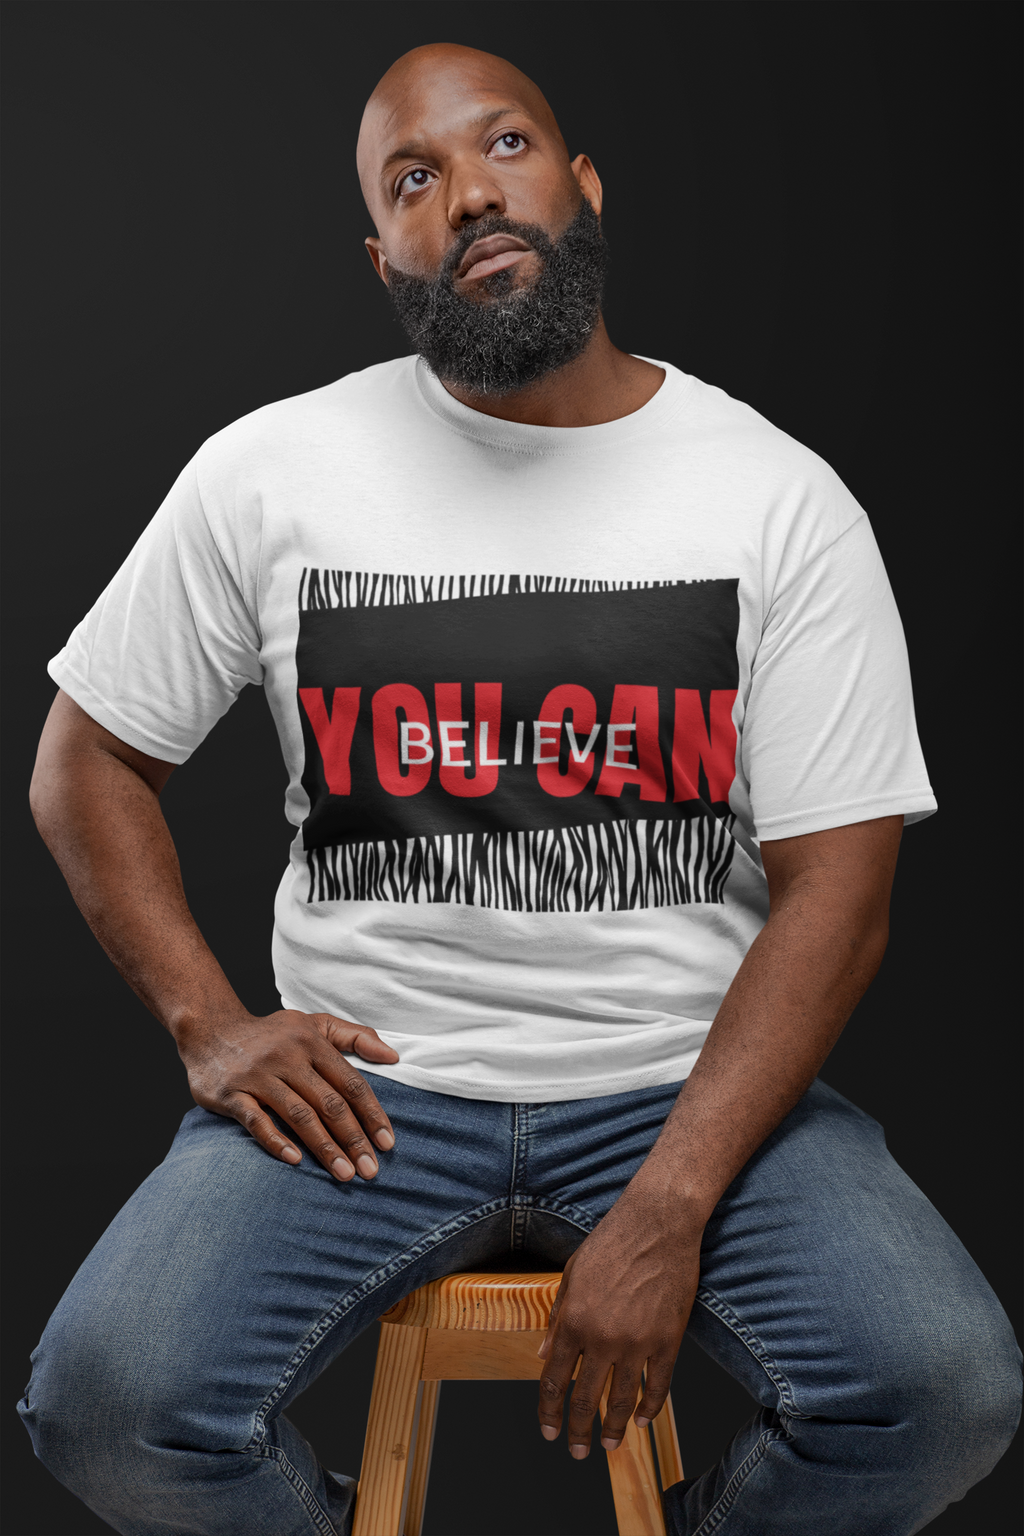 "Believe in Yourself" T-Shirt